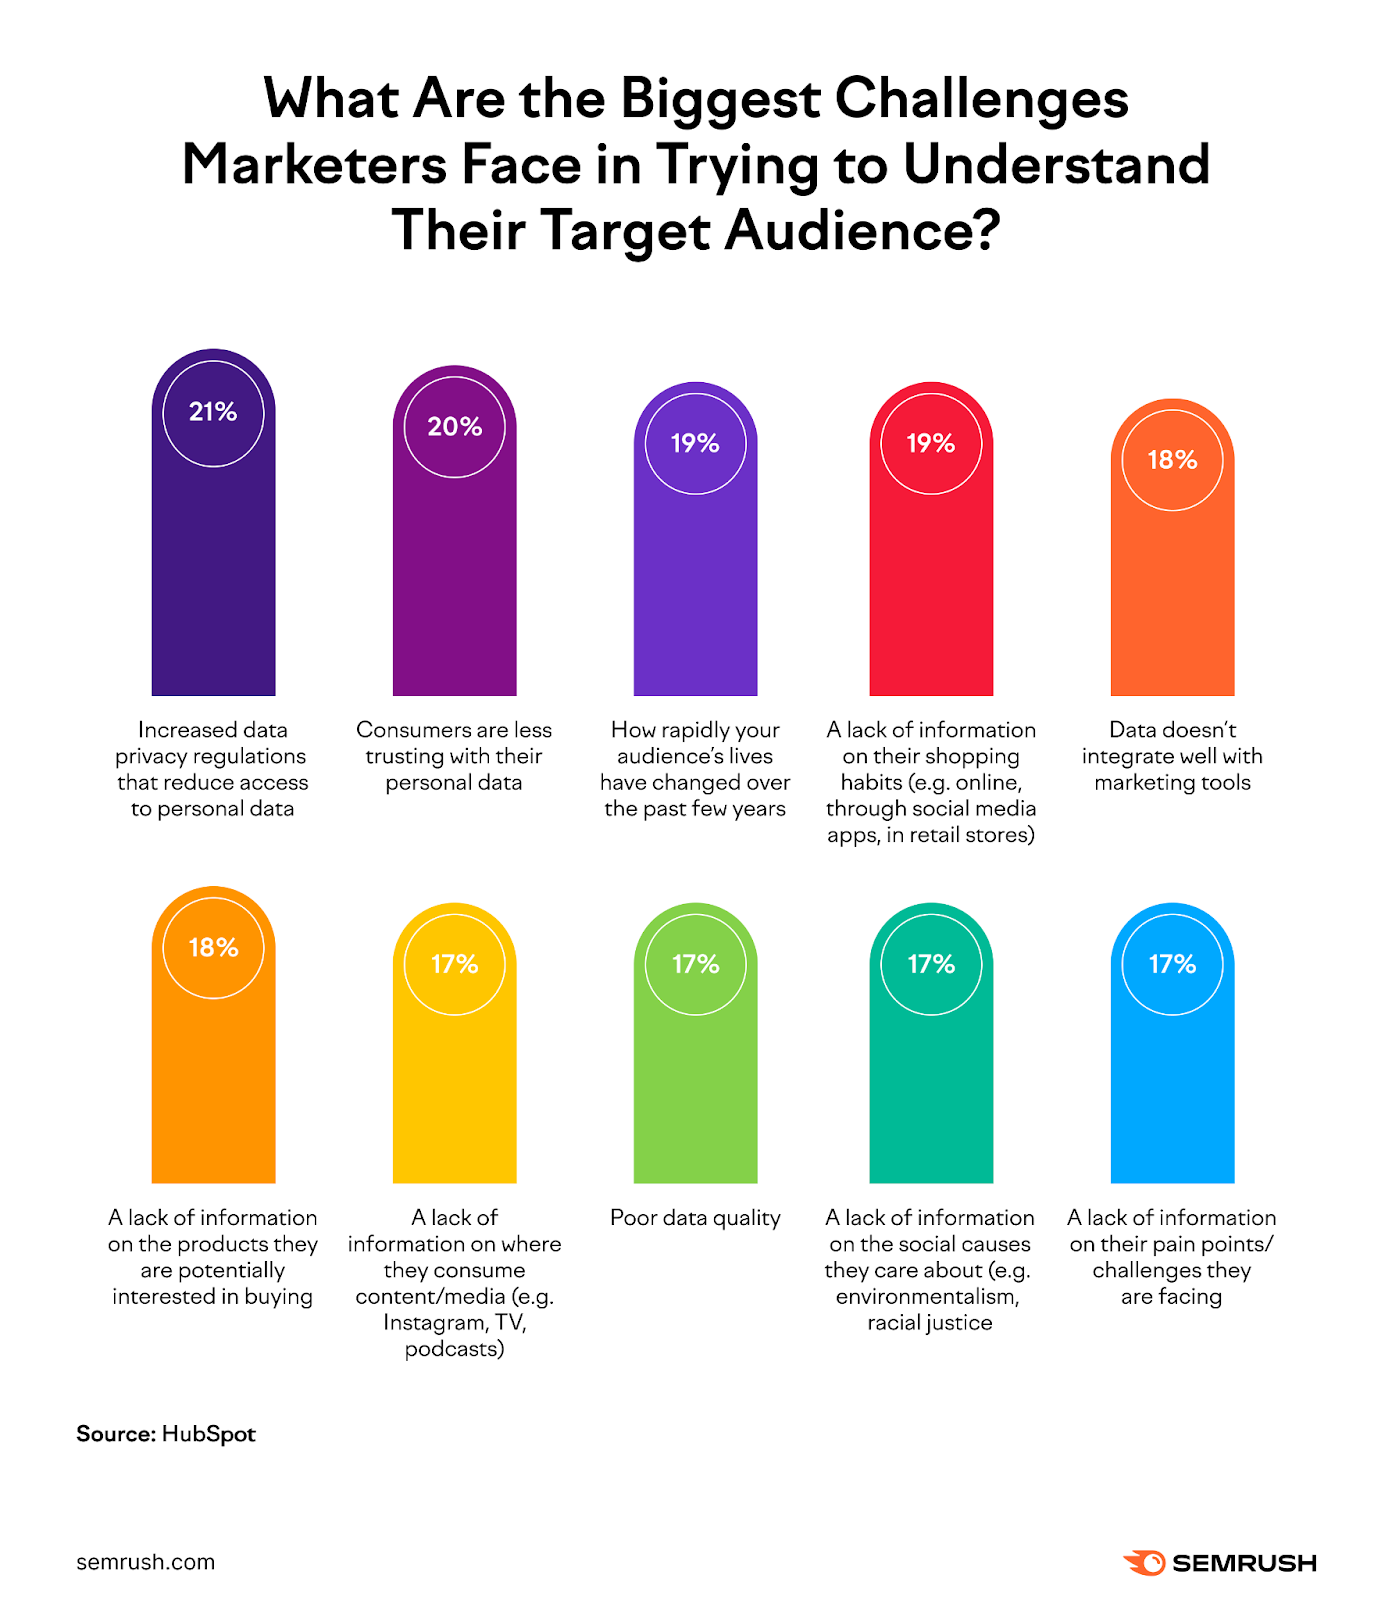 HubSpot survey results for "What are the biggest challenges marketers face in trying to understand their target audience?" question